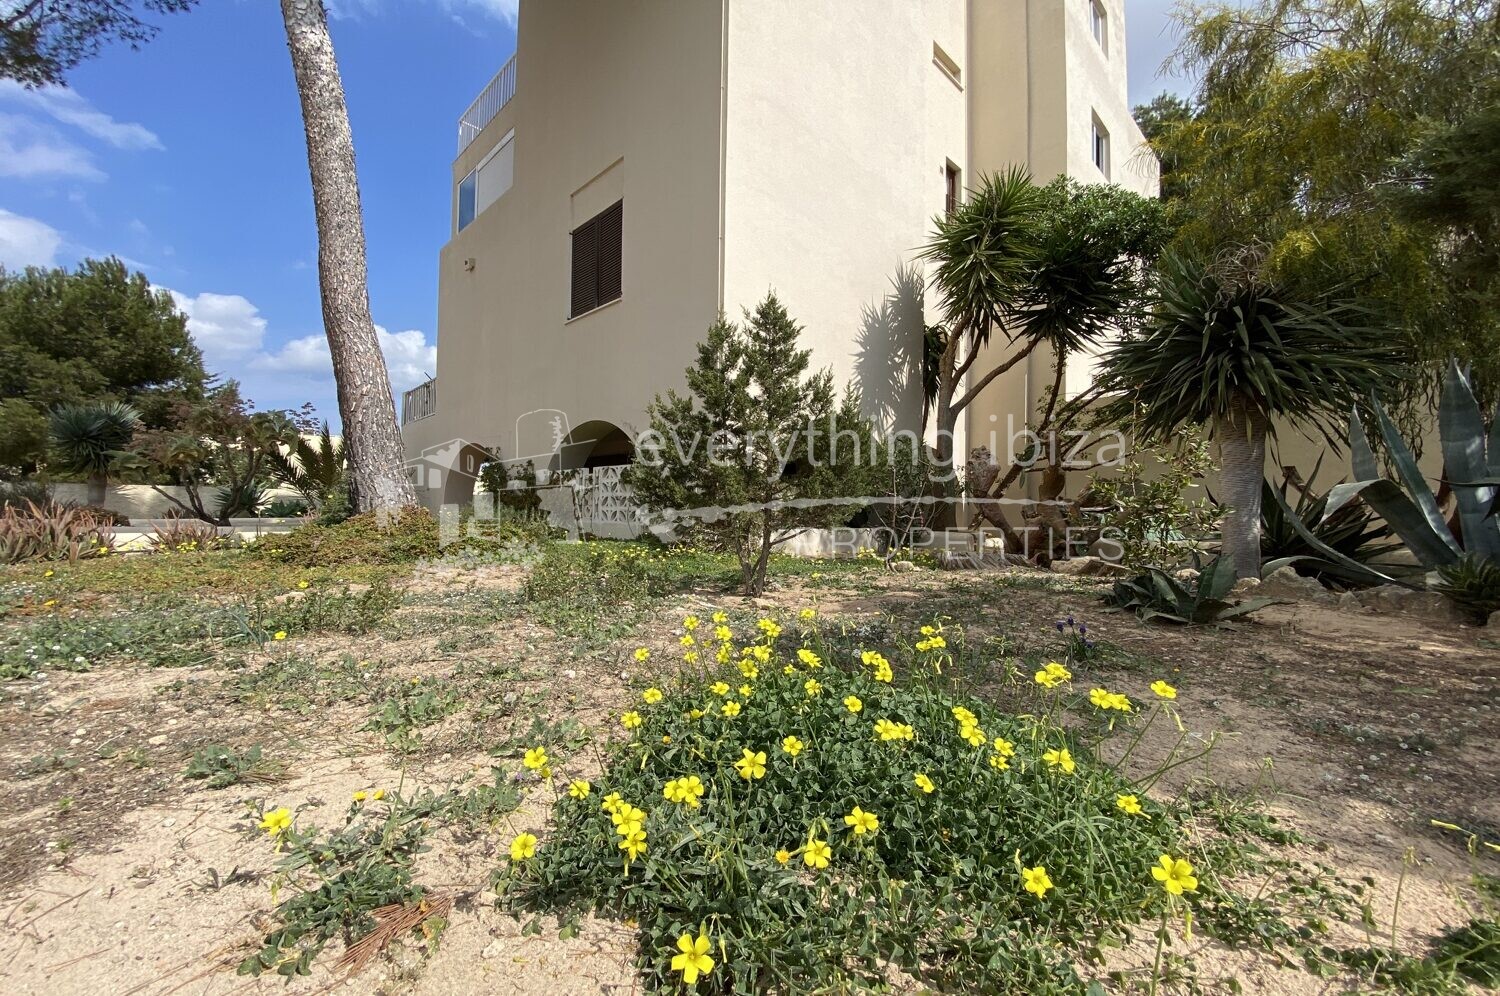 Charming 2 Bedroomed Apartment Close to Sea & Beaches, ref. 1506, for sale in Ibiza by everything ibiza Properties